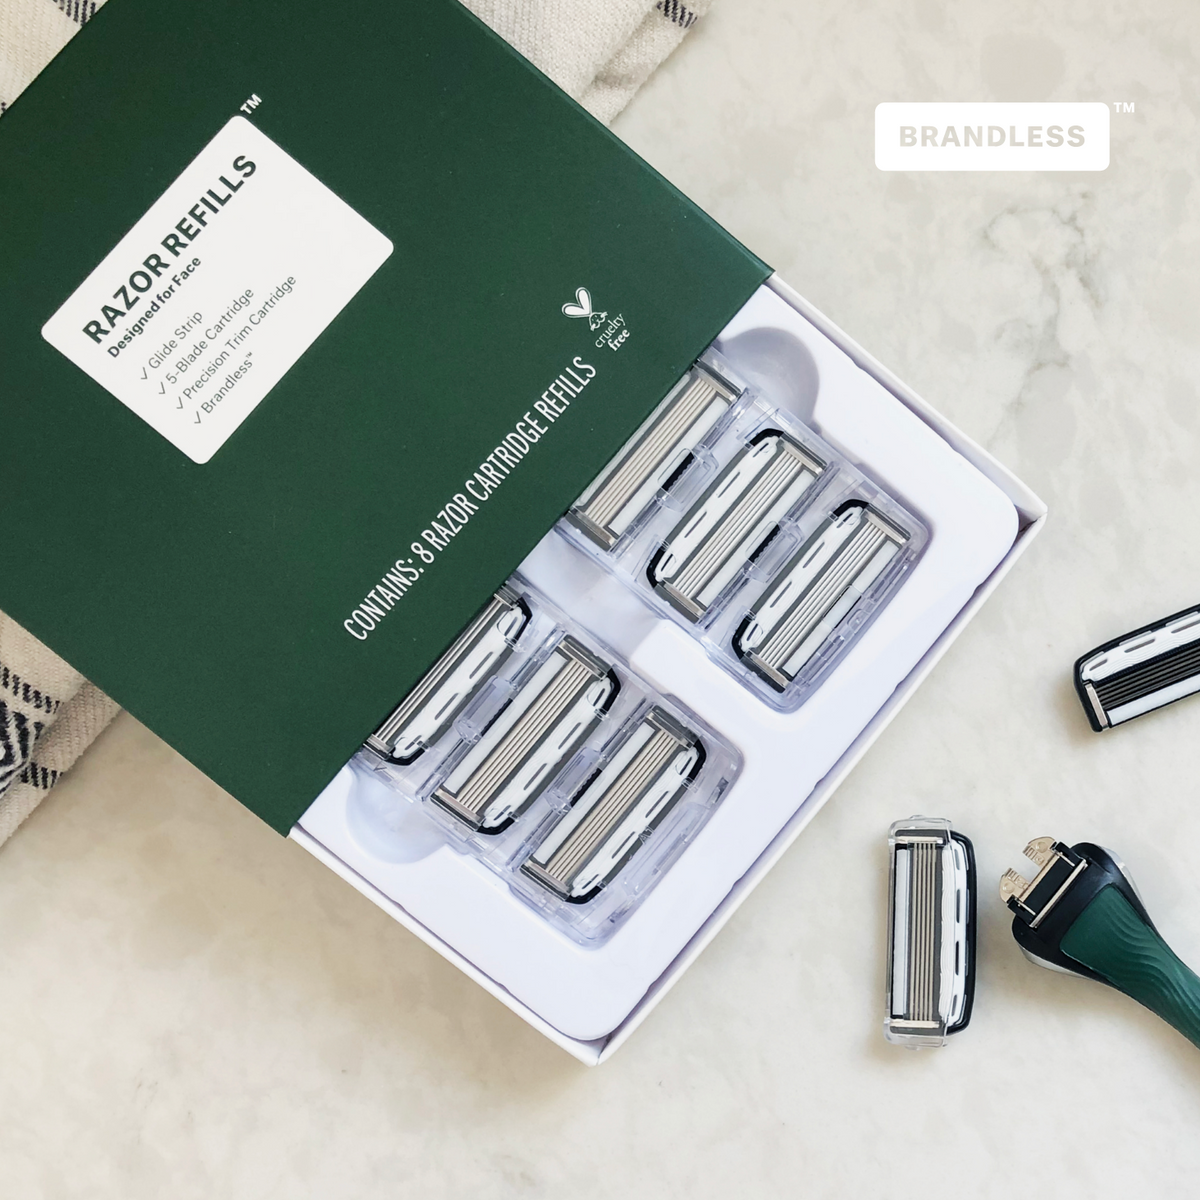 Lifestyle photo, razor refills for face, box slightly open and showing the razor refill cartridges, box sits on a white marble bathroom countertop next to a disassembled razor handle and cartridge pair.